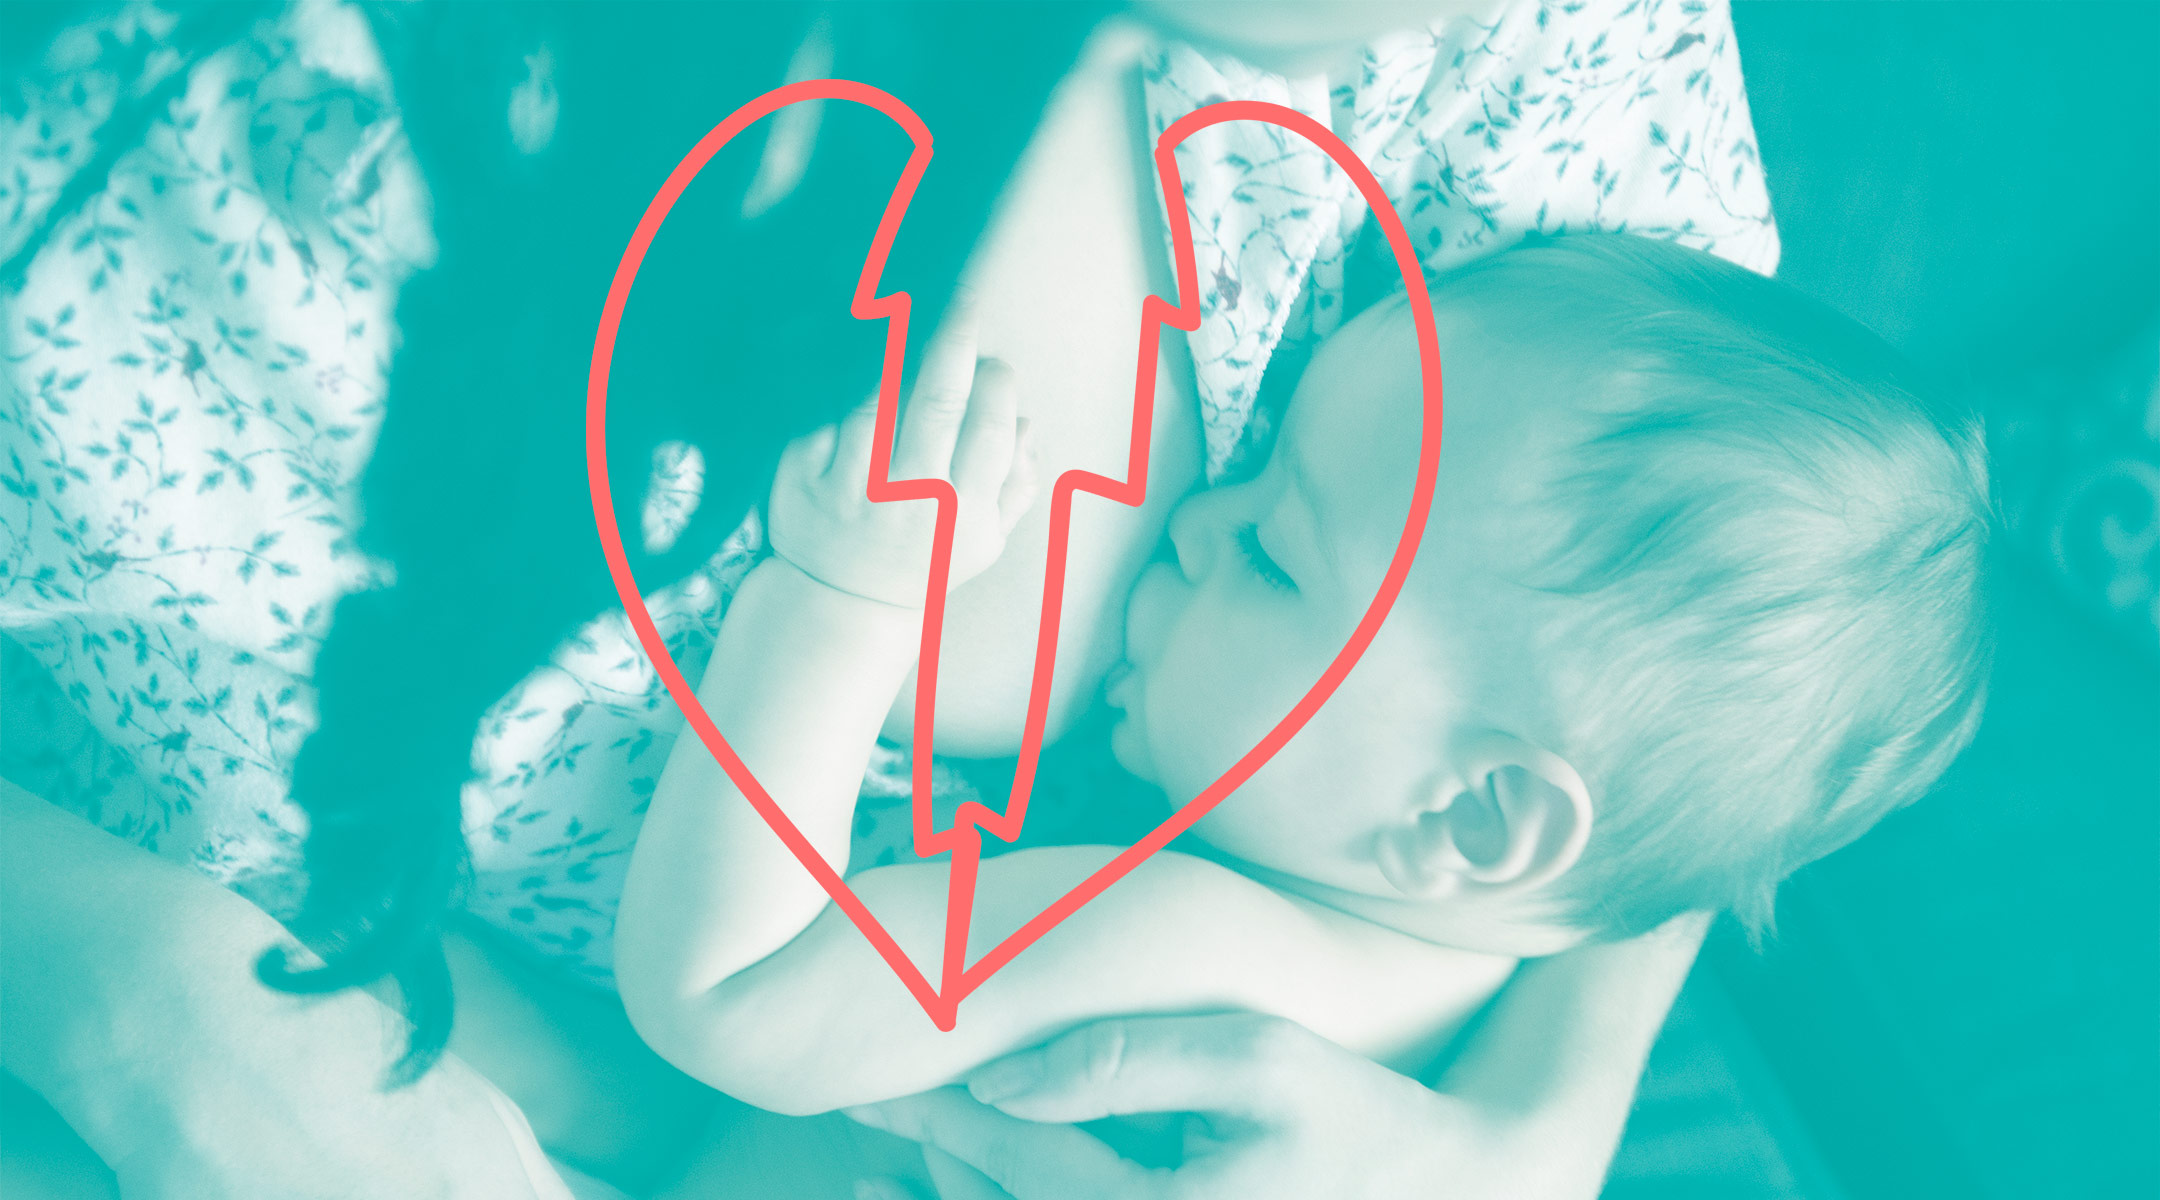 blue filter gradient photo treatment over image of mom breastfeeding with a broken heart illustration overlay